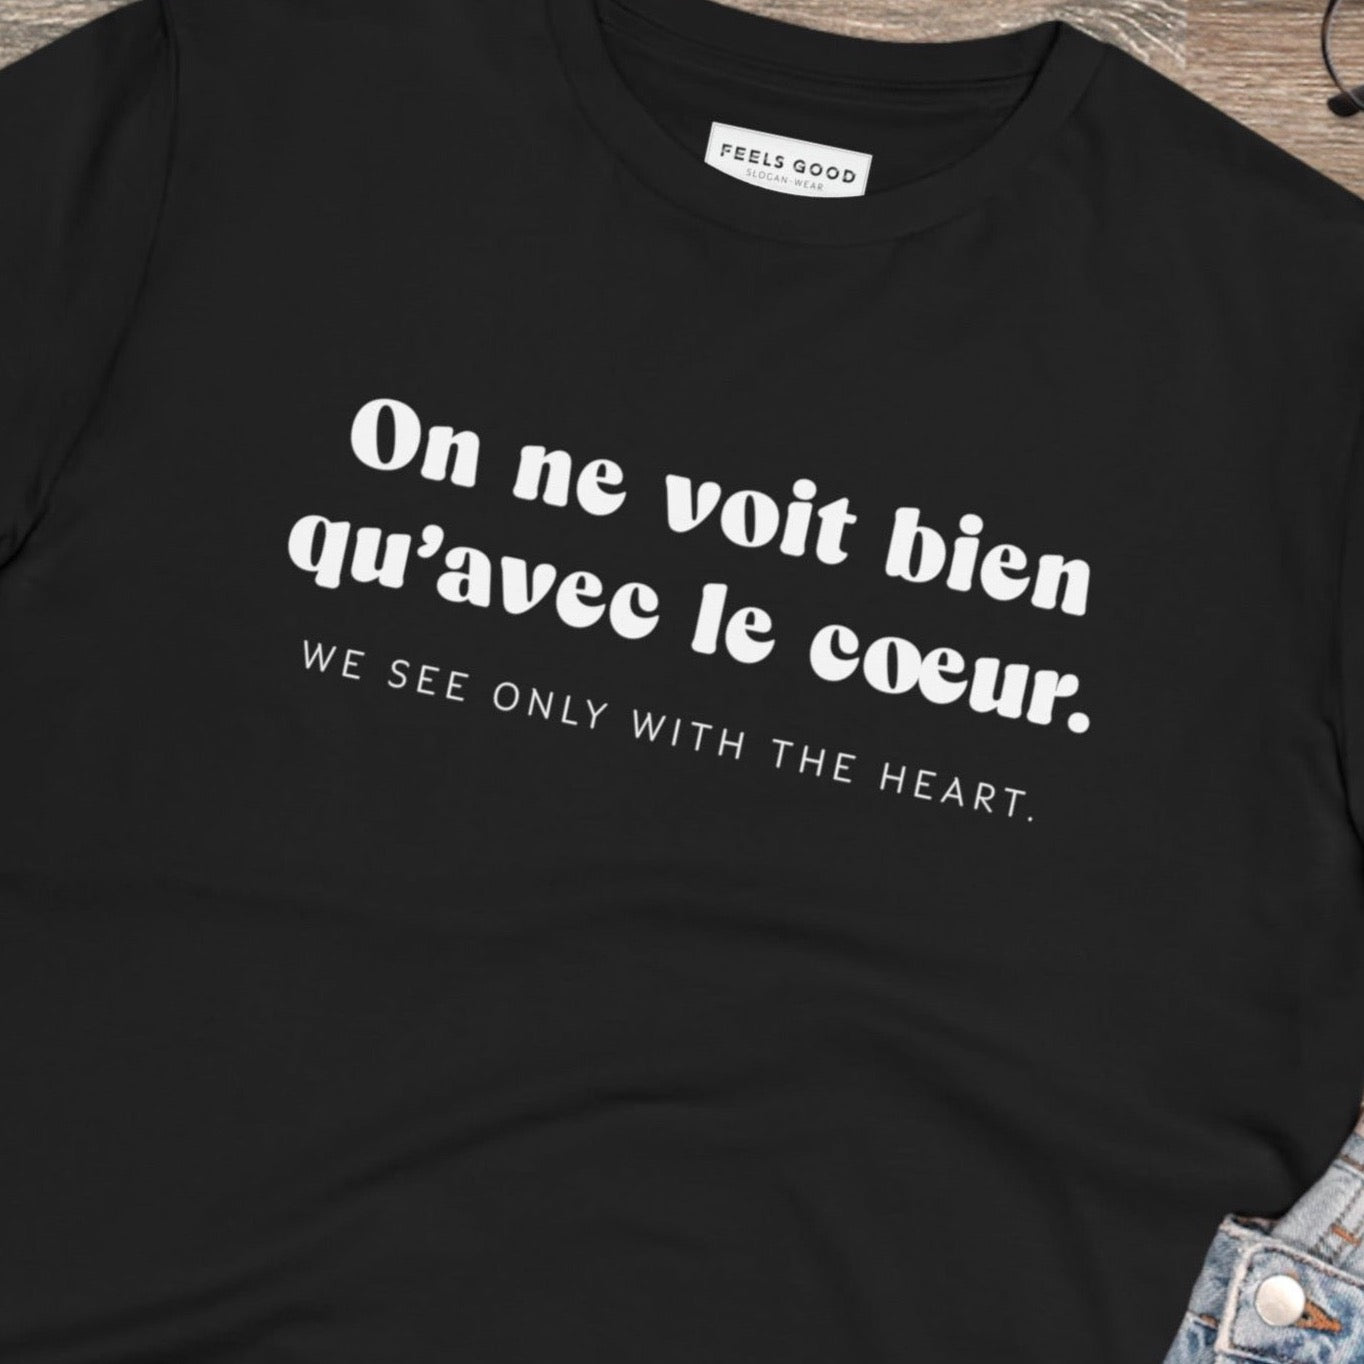 Francophile 'Seeing With The Heart' Organic Cotton T-shirt - Francophile Tshirt